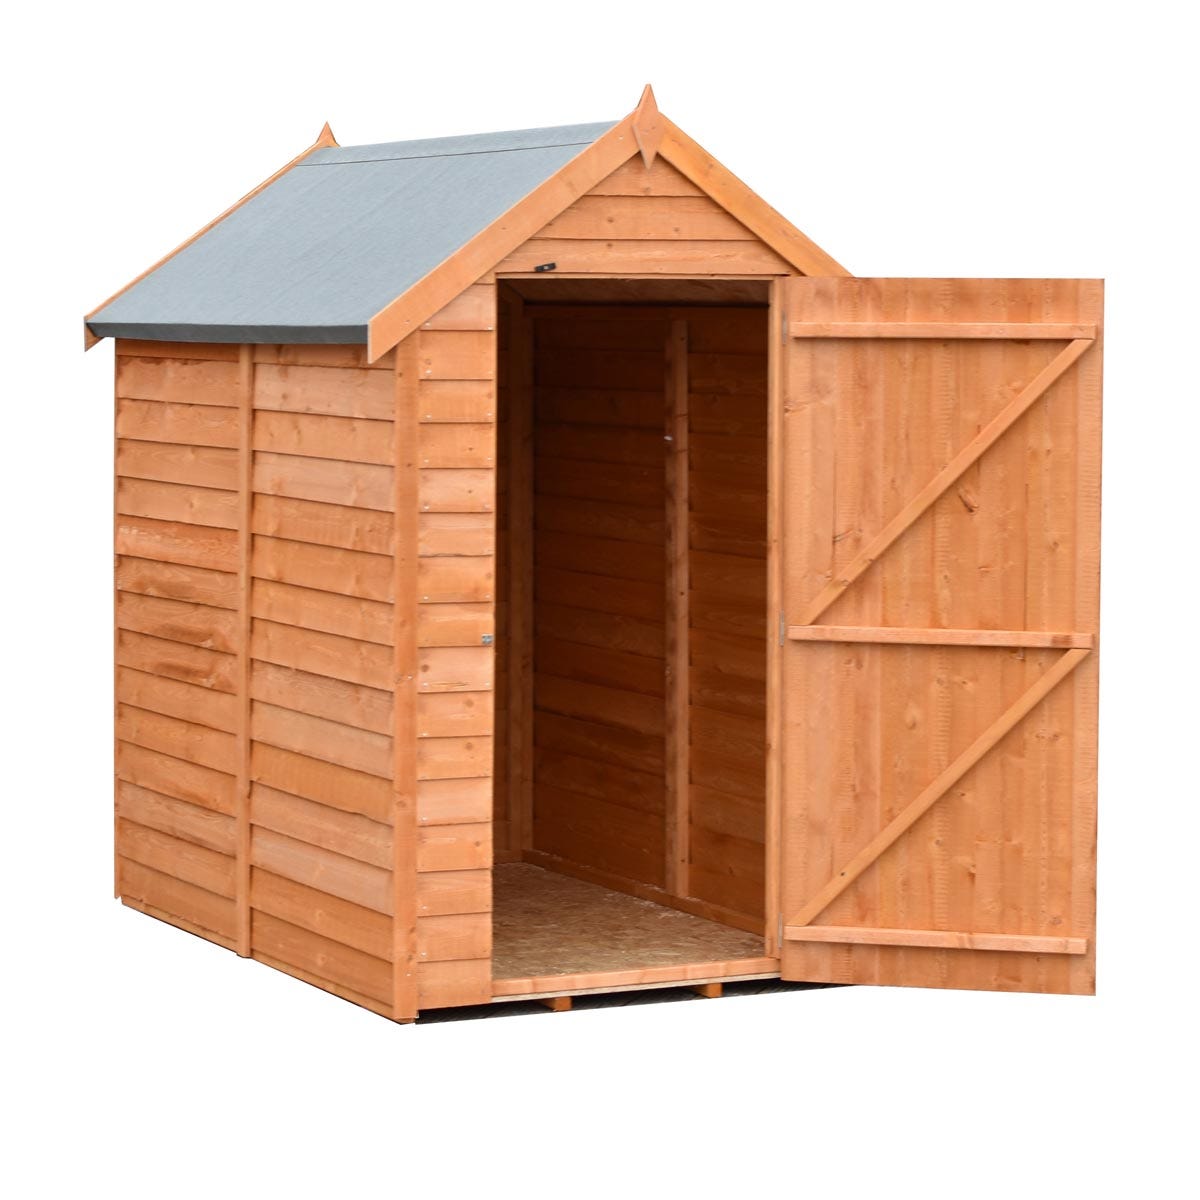 Shire Value Overlap Shed - 6ft x 4ft